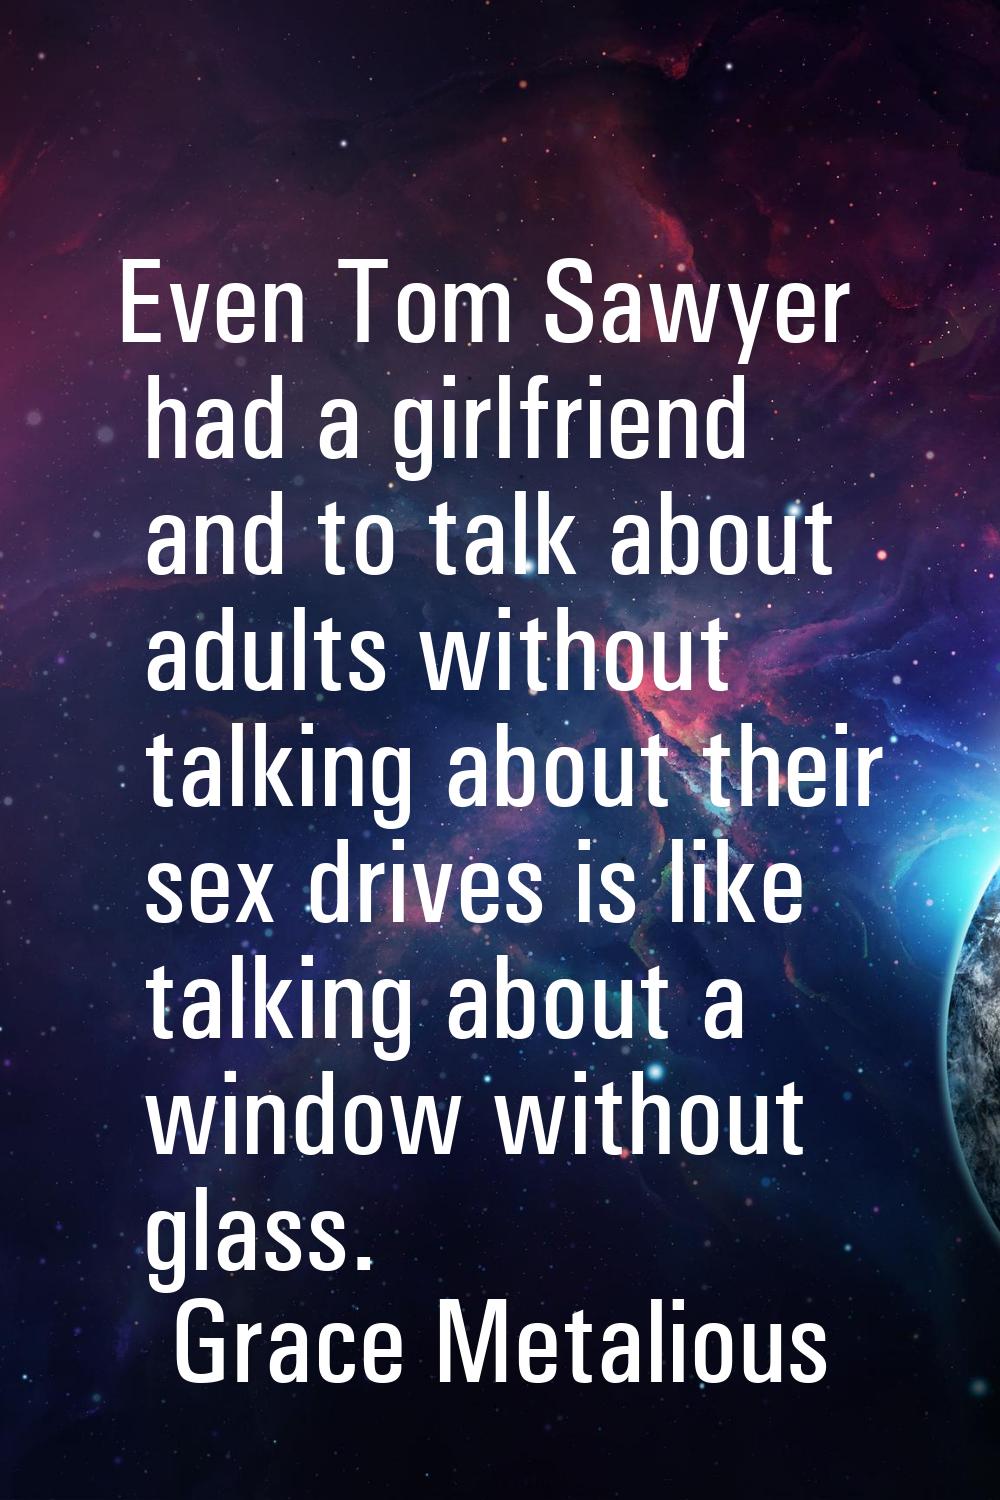 Even Tom Sawyer had a girlfriend and to talk about adults without talking about their sex drives is